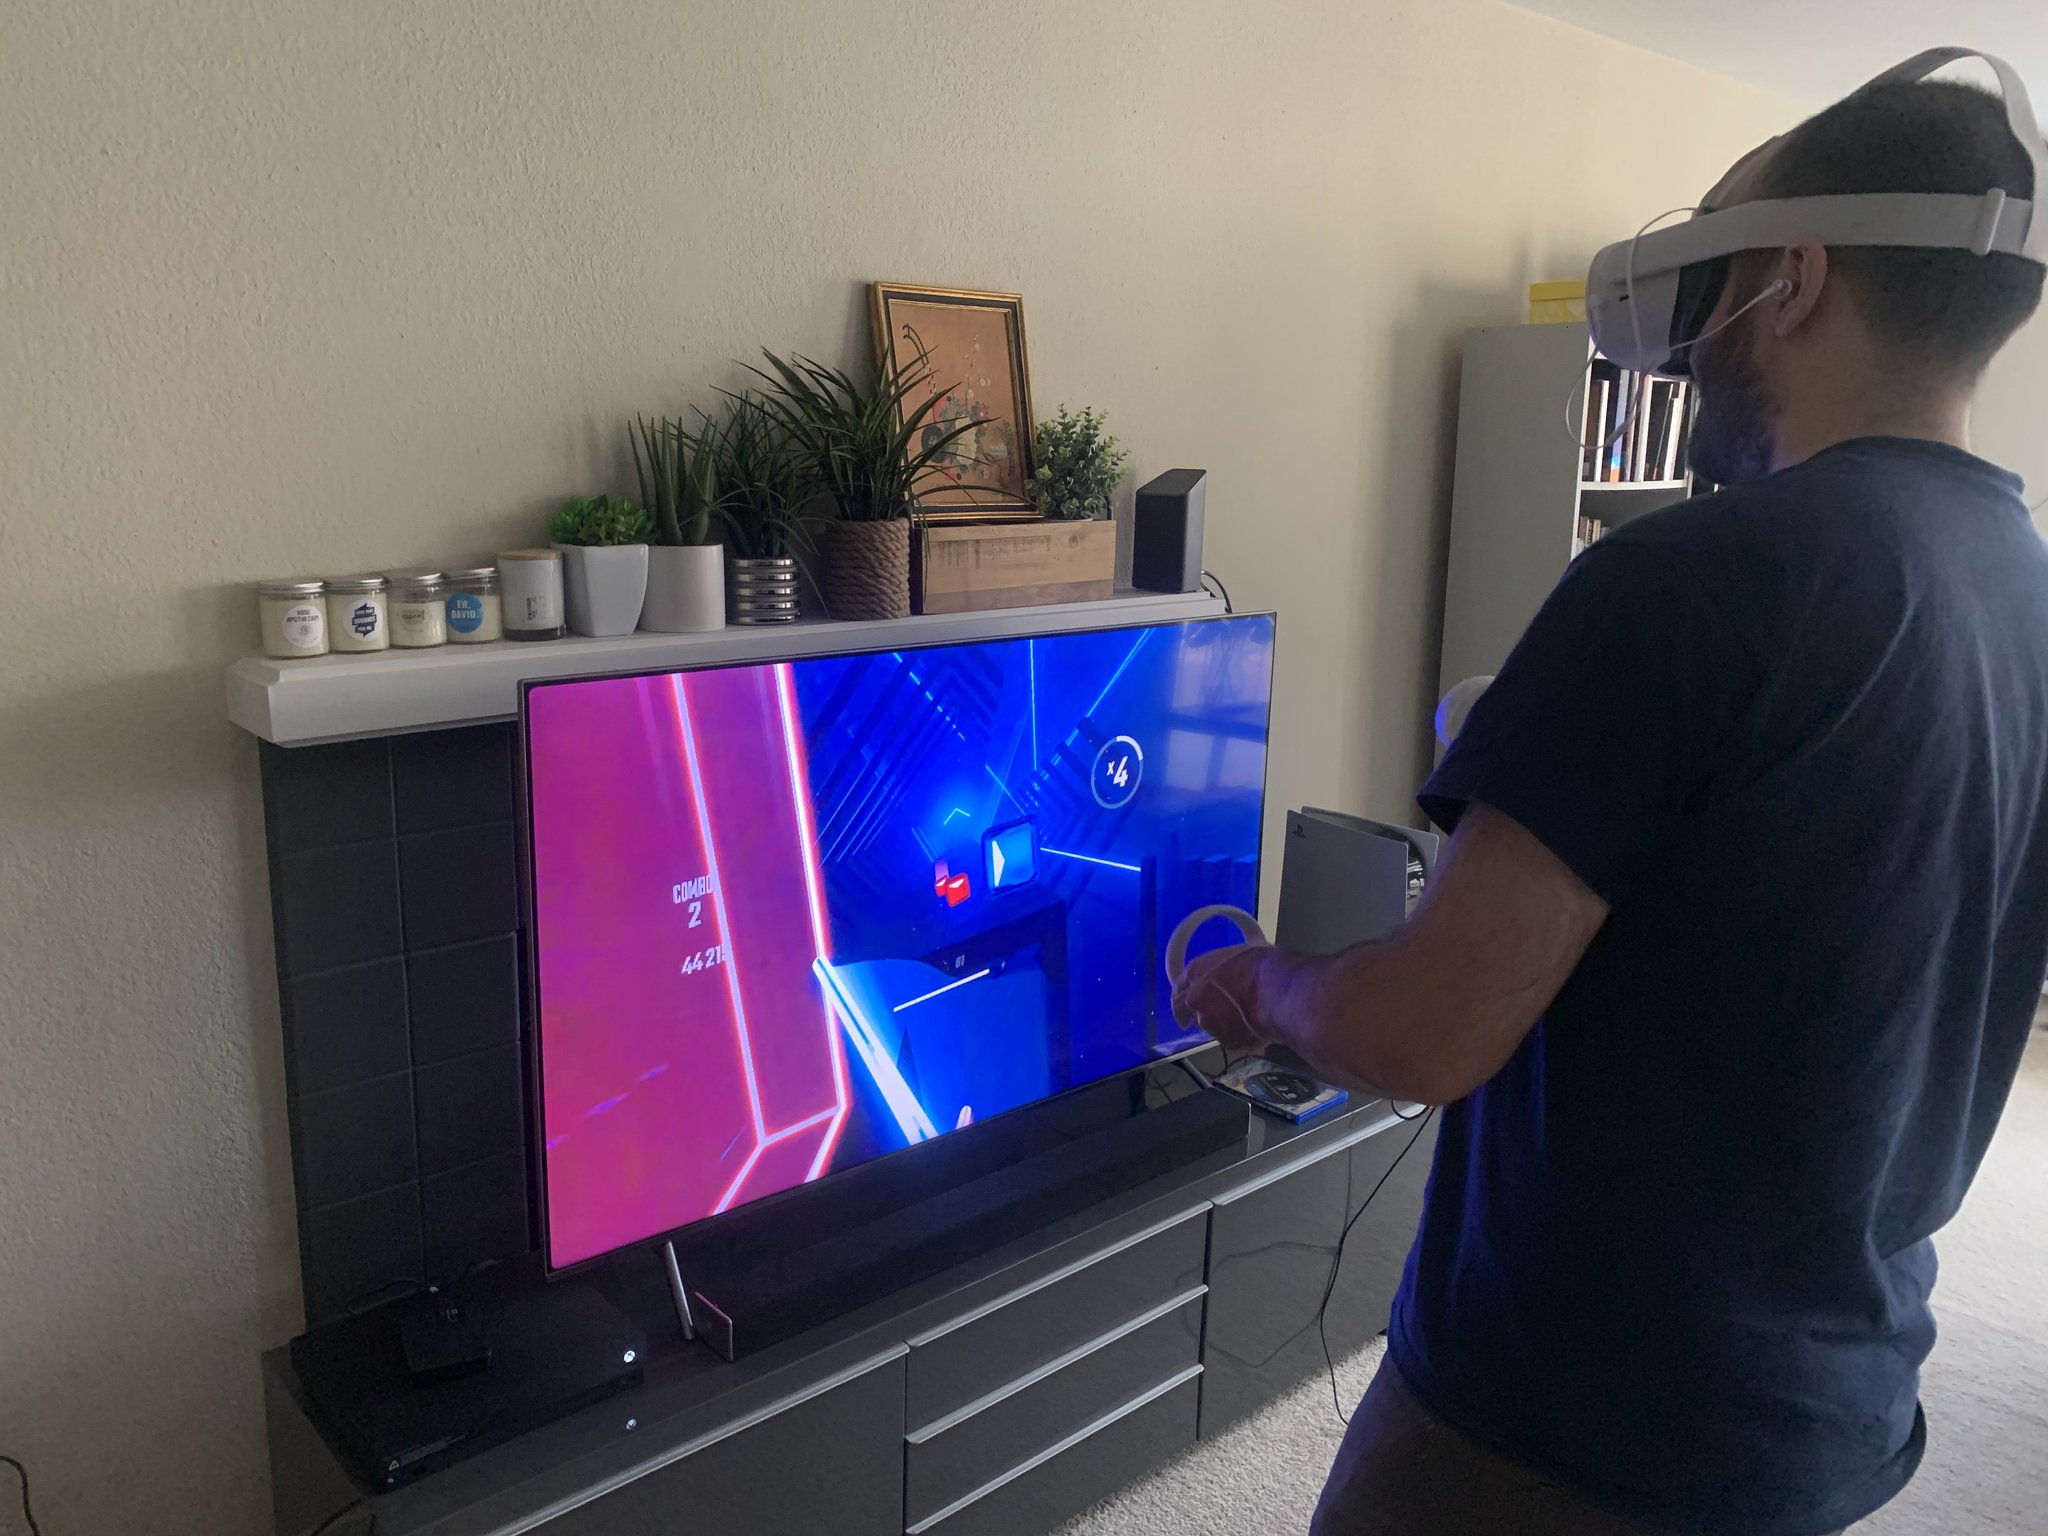 vasketøj Blåt mærke opskrift How to share Oculus Quest 2 games on the TV for friends and family to see |  Android Central